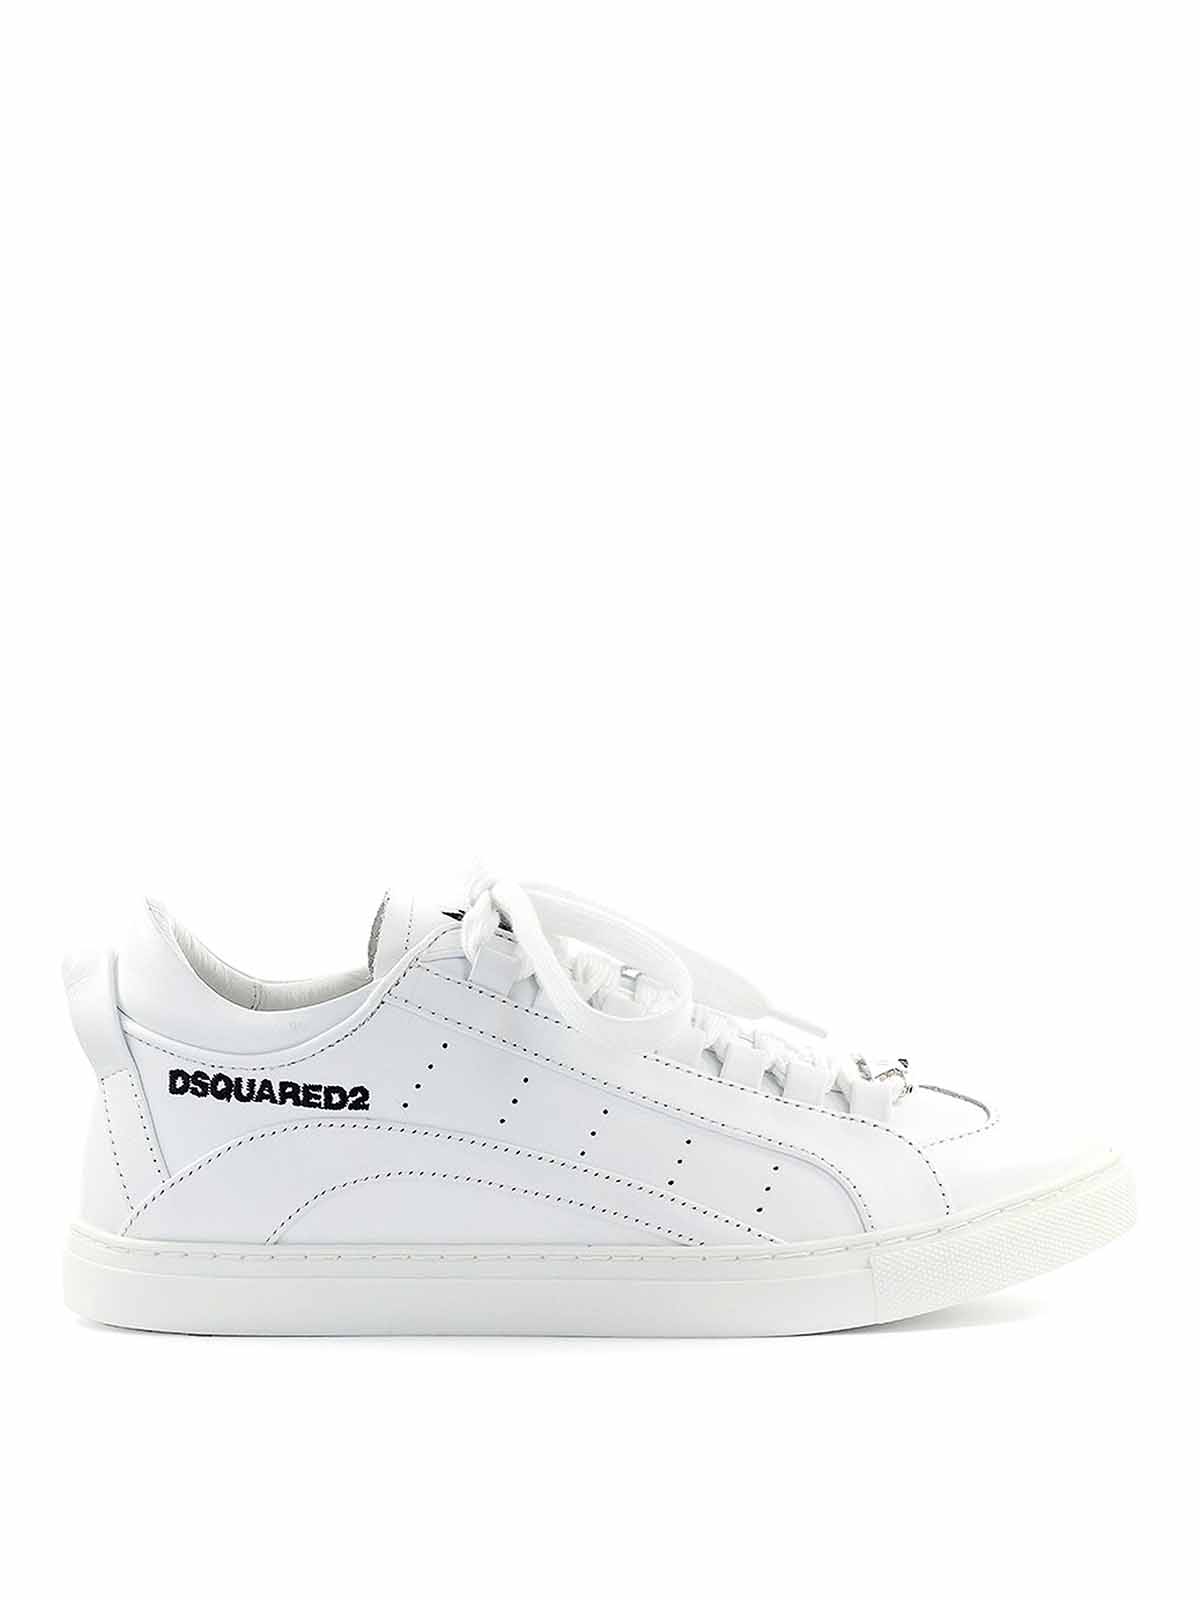 Dsquared2 251 white low top sneakers - SNM0090065000011062